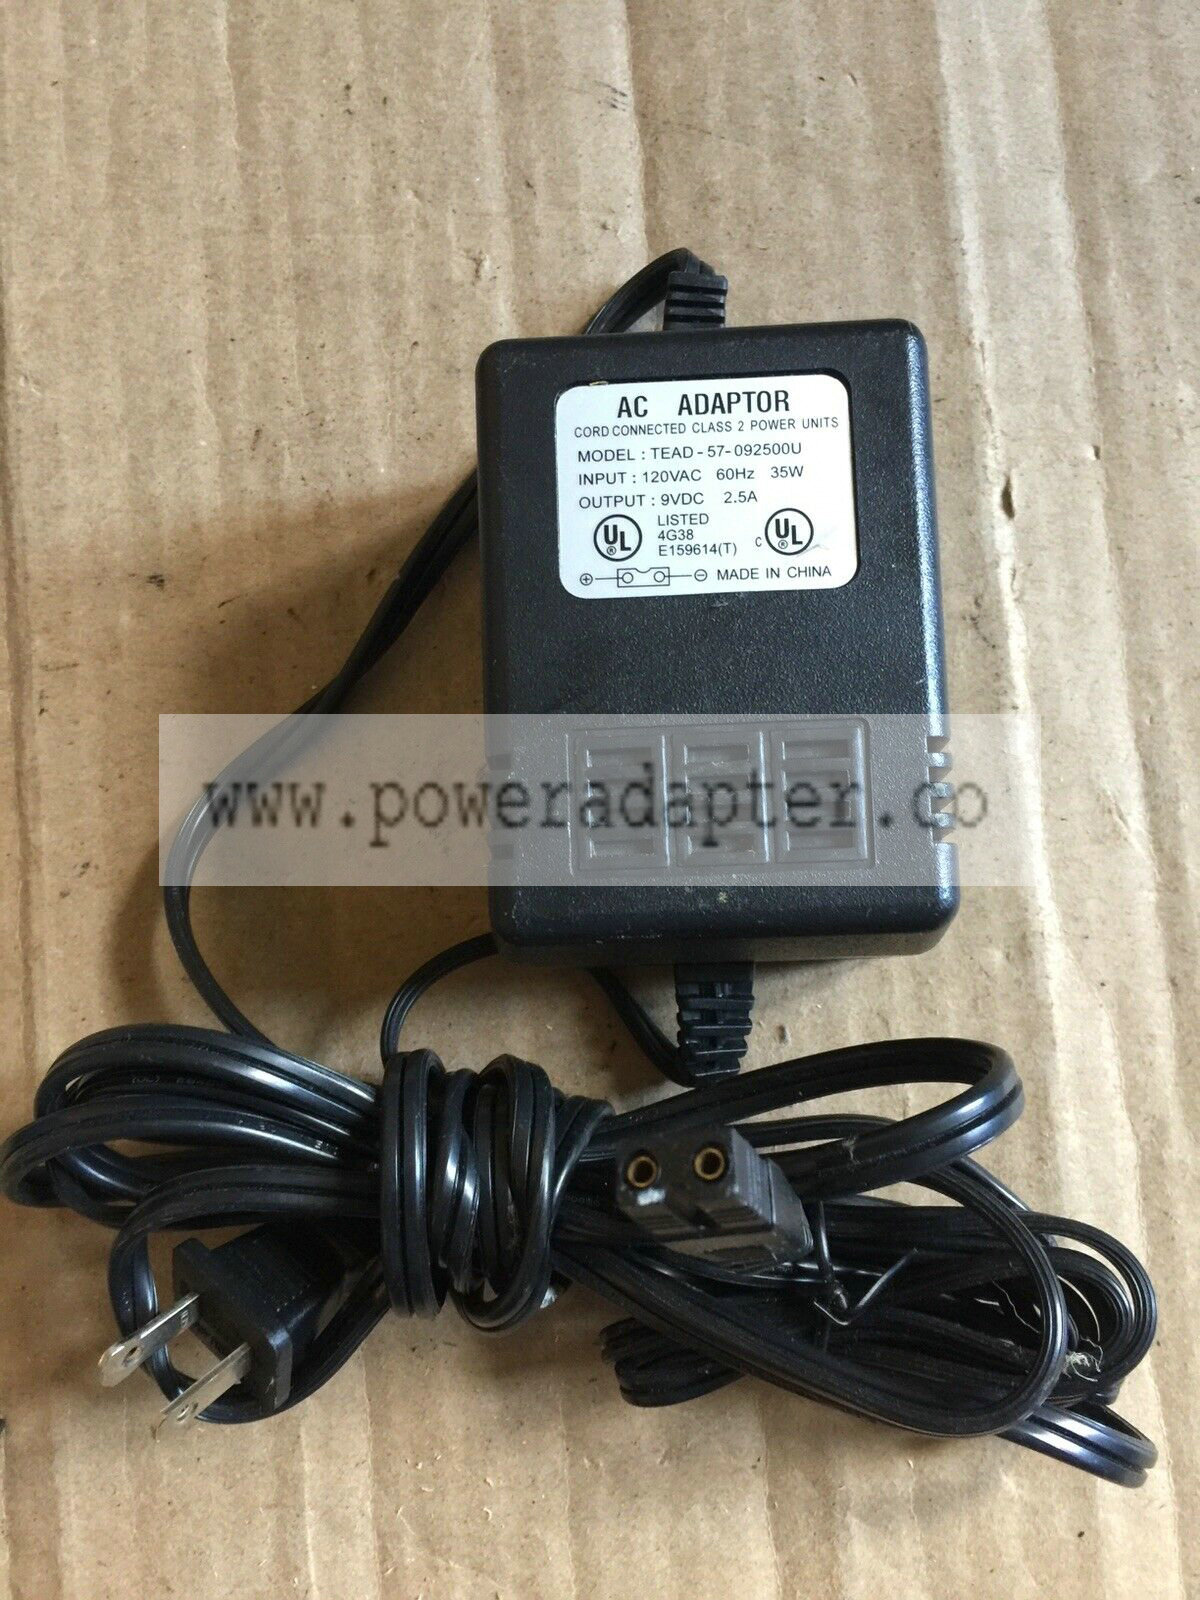 AC Adaptor TEAD-57-092500U Cord Connected Class 2 Power Supply Transformer 9VDC AC Adaptor TEAD-57-092500U Cord Conn - Click Image to Close